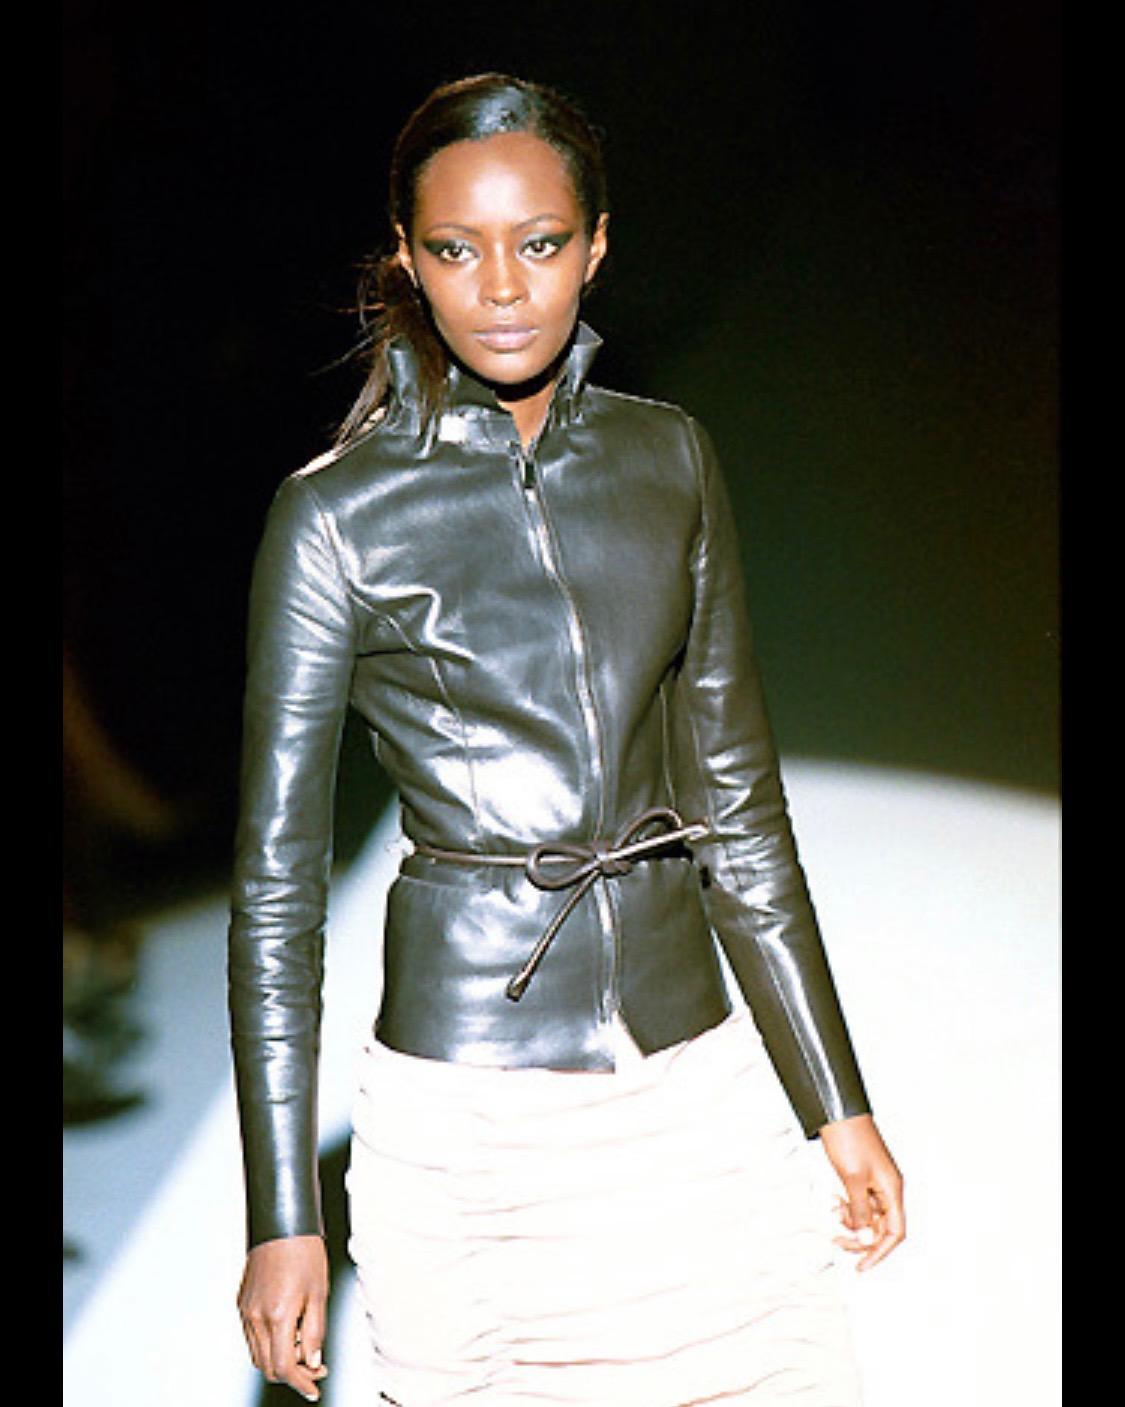 TheRealList presents: a skin-hugging leather zip-up biker jacket designed by Tom Ford for the Gucci F/W 1999 collection. This piece debuted as look 11 of the runway presentation. The fit is classic Tom Ford, sleek and sexy.

Follow us on Instagram!